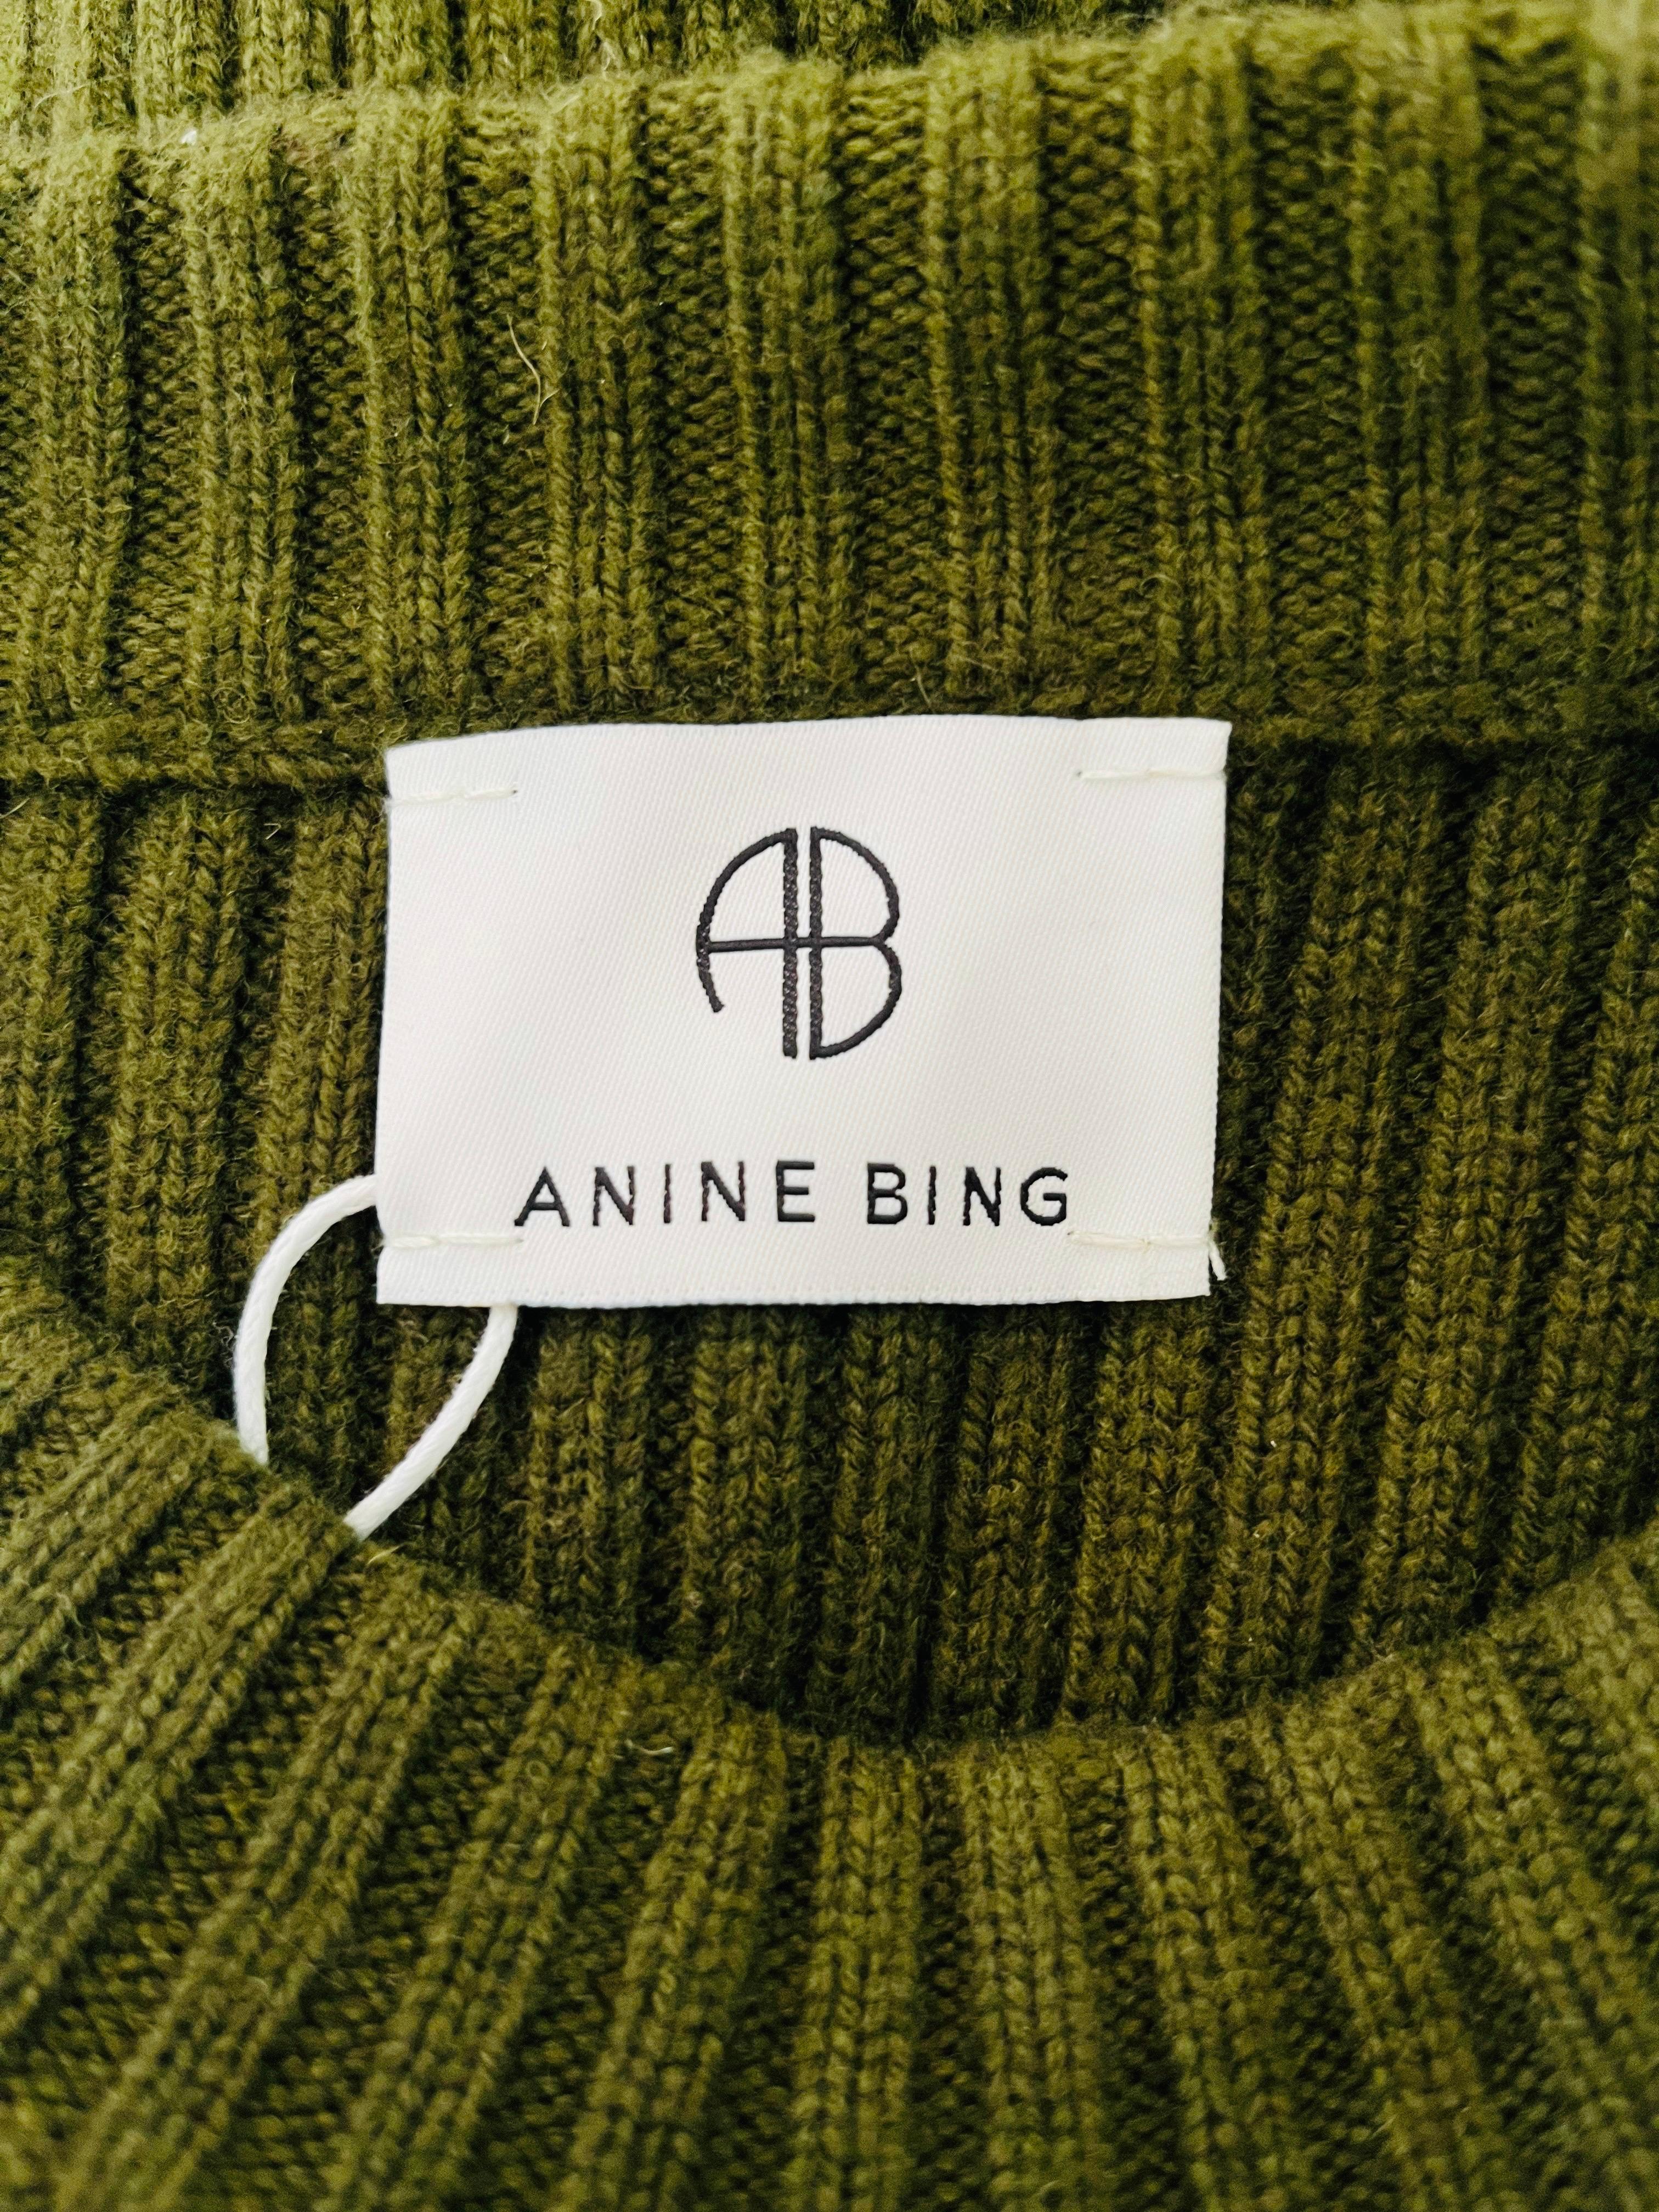 Anine Bing Ribbed Wool Blend Dress For Sale 3